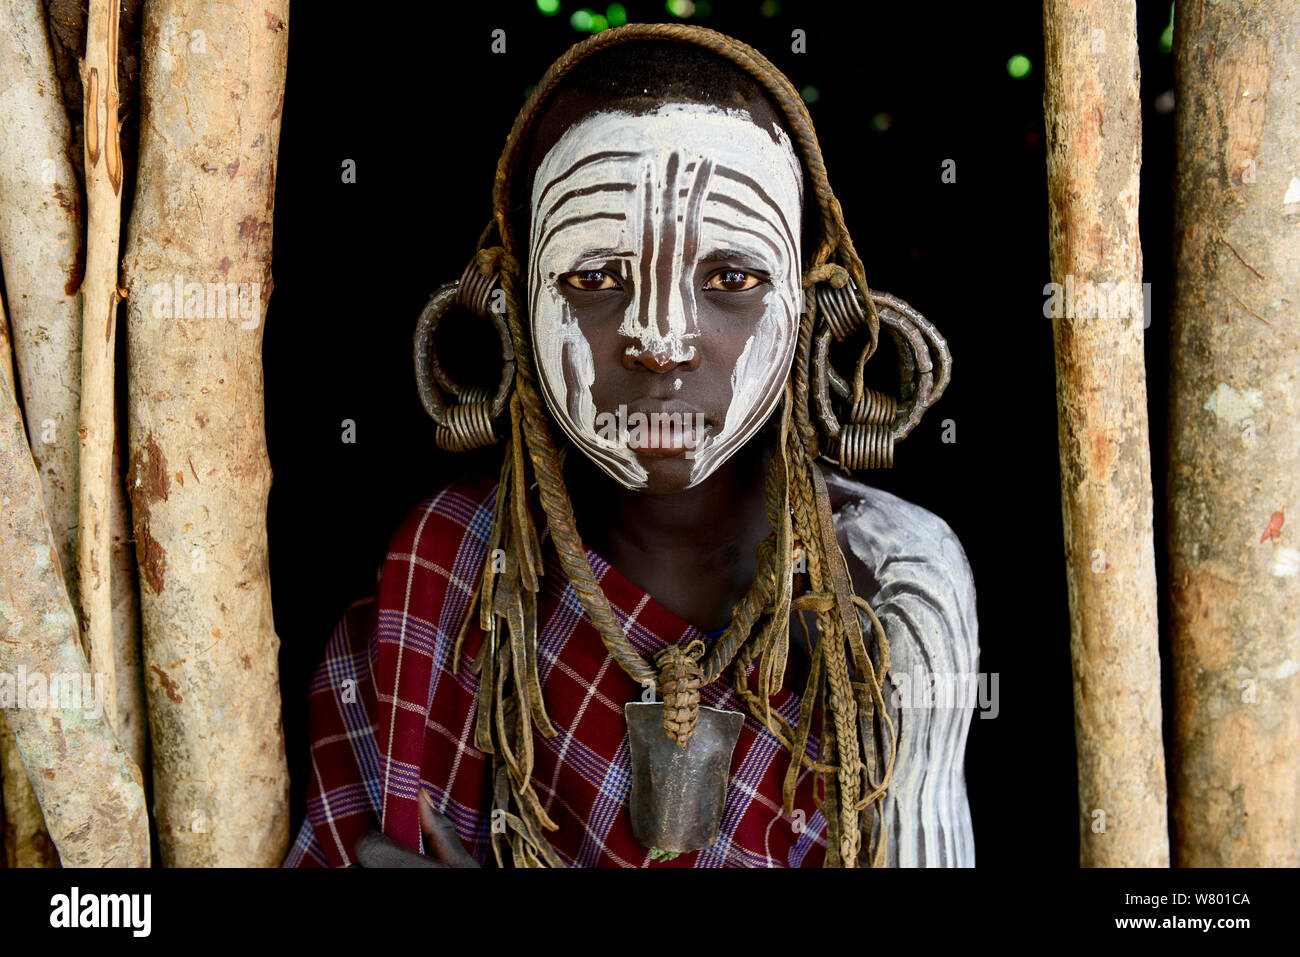 Girl with traditional clothes and ornaments. Mursi Tribe, Mago National Park. Ethiopia, November 2014 Stock Photo